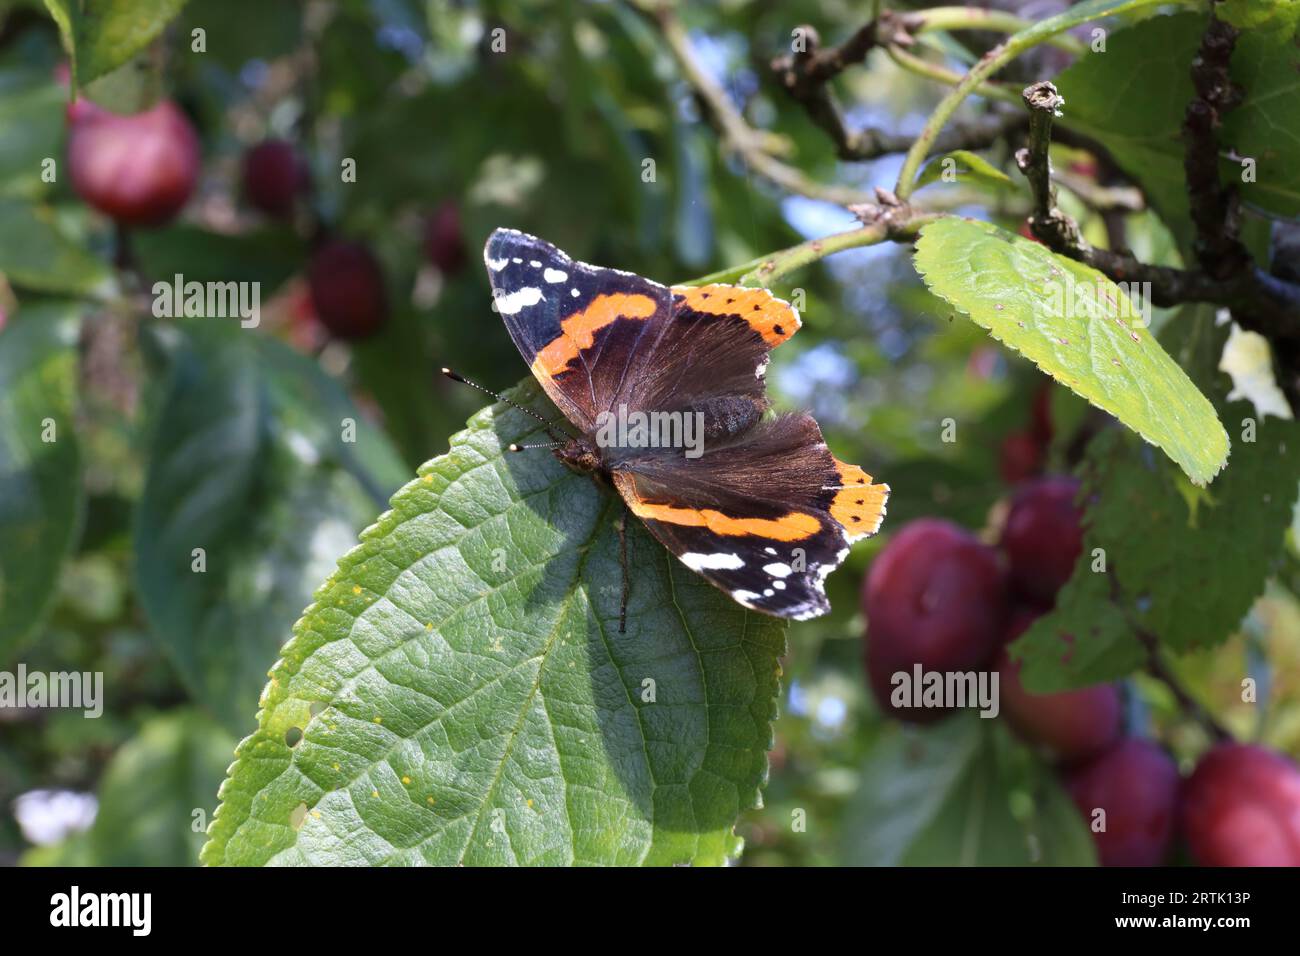 Rebecca Atalanta, or Red Admiral butterfly as is better known, rests with open wings on the leaf of a Victoria Plum Tree. Stock Photo